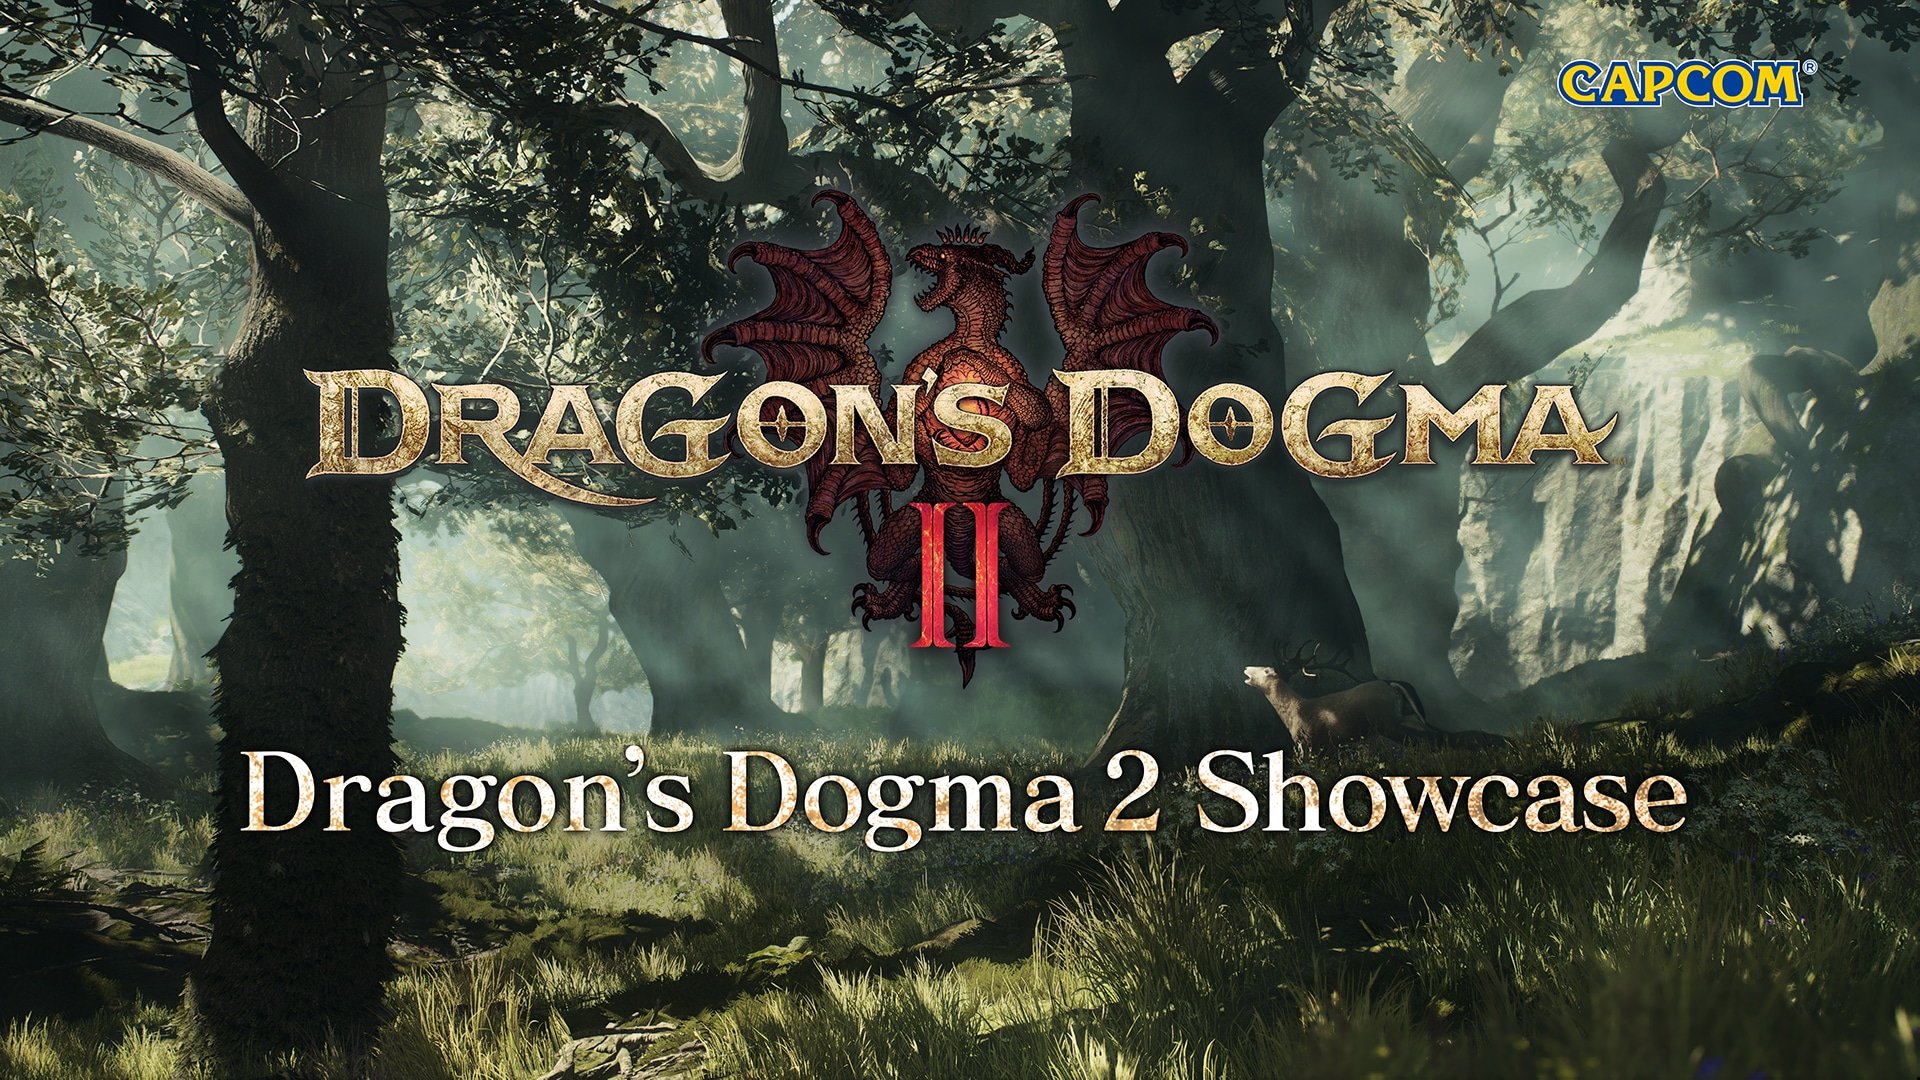 Dragon's Dogma II confirmed for PS5, Xbox Series, and PC; debut trailer,  details, and screenshots - Gematsu